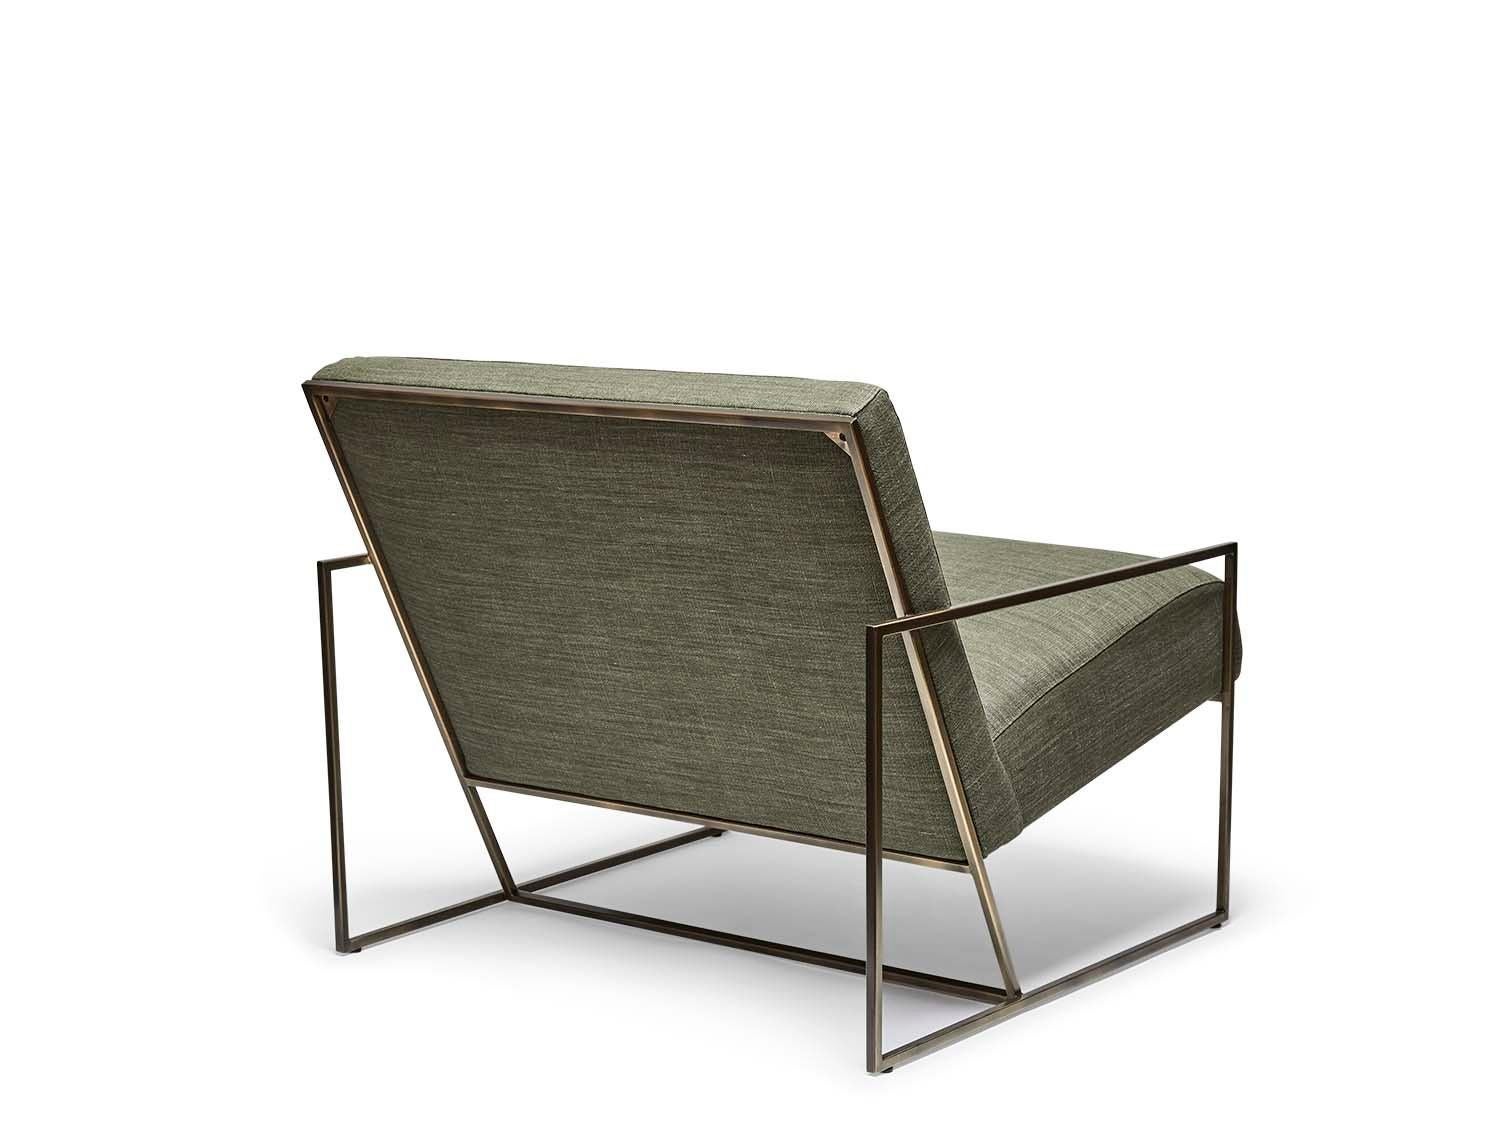 American Brass and Linen Thin Frame Lounge Chair by Lawson-Fenning